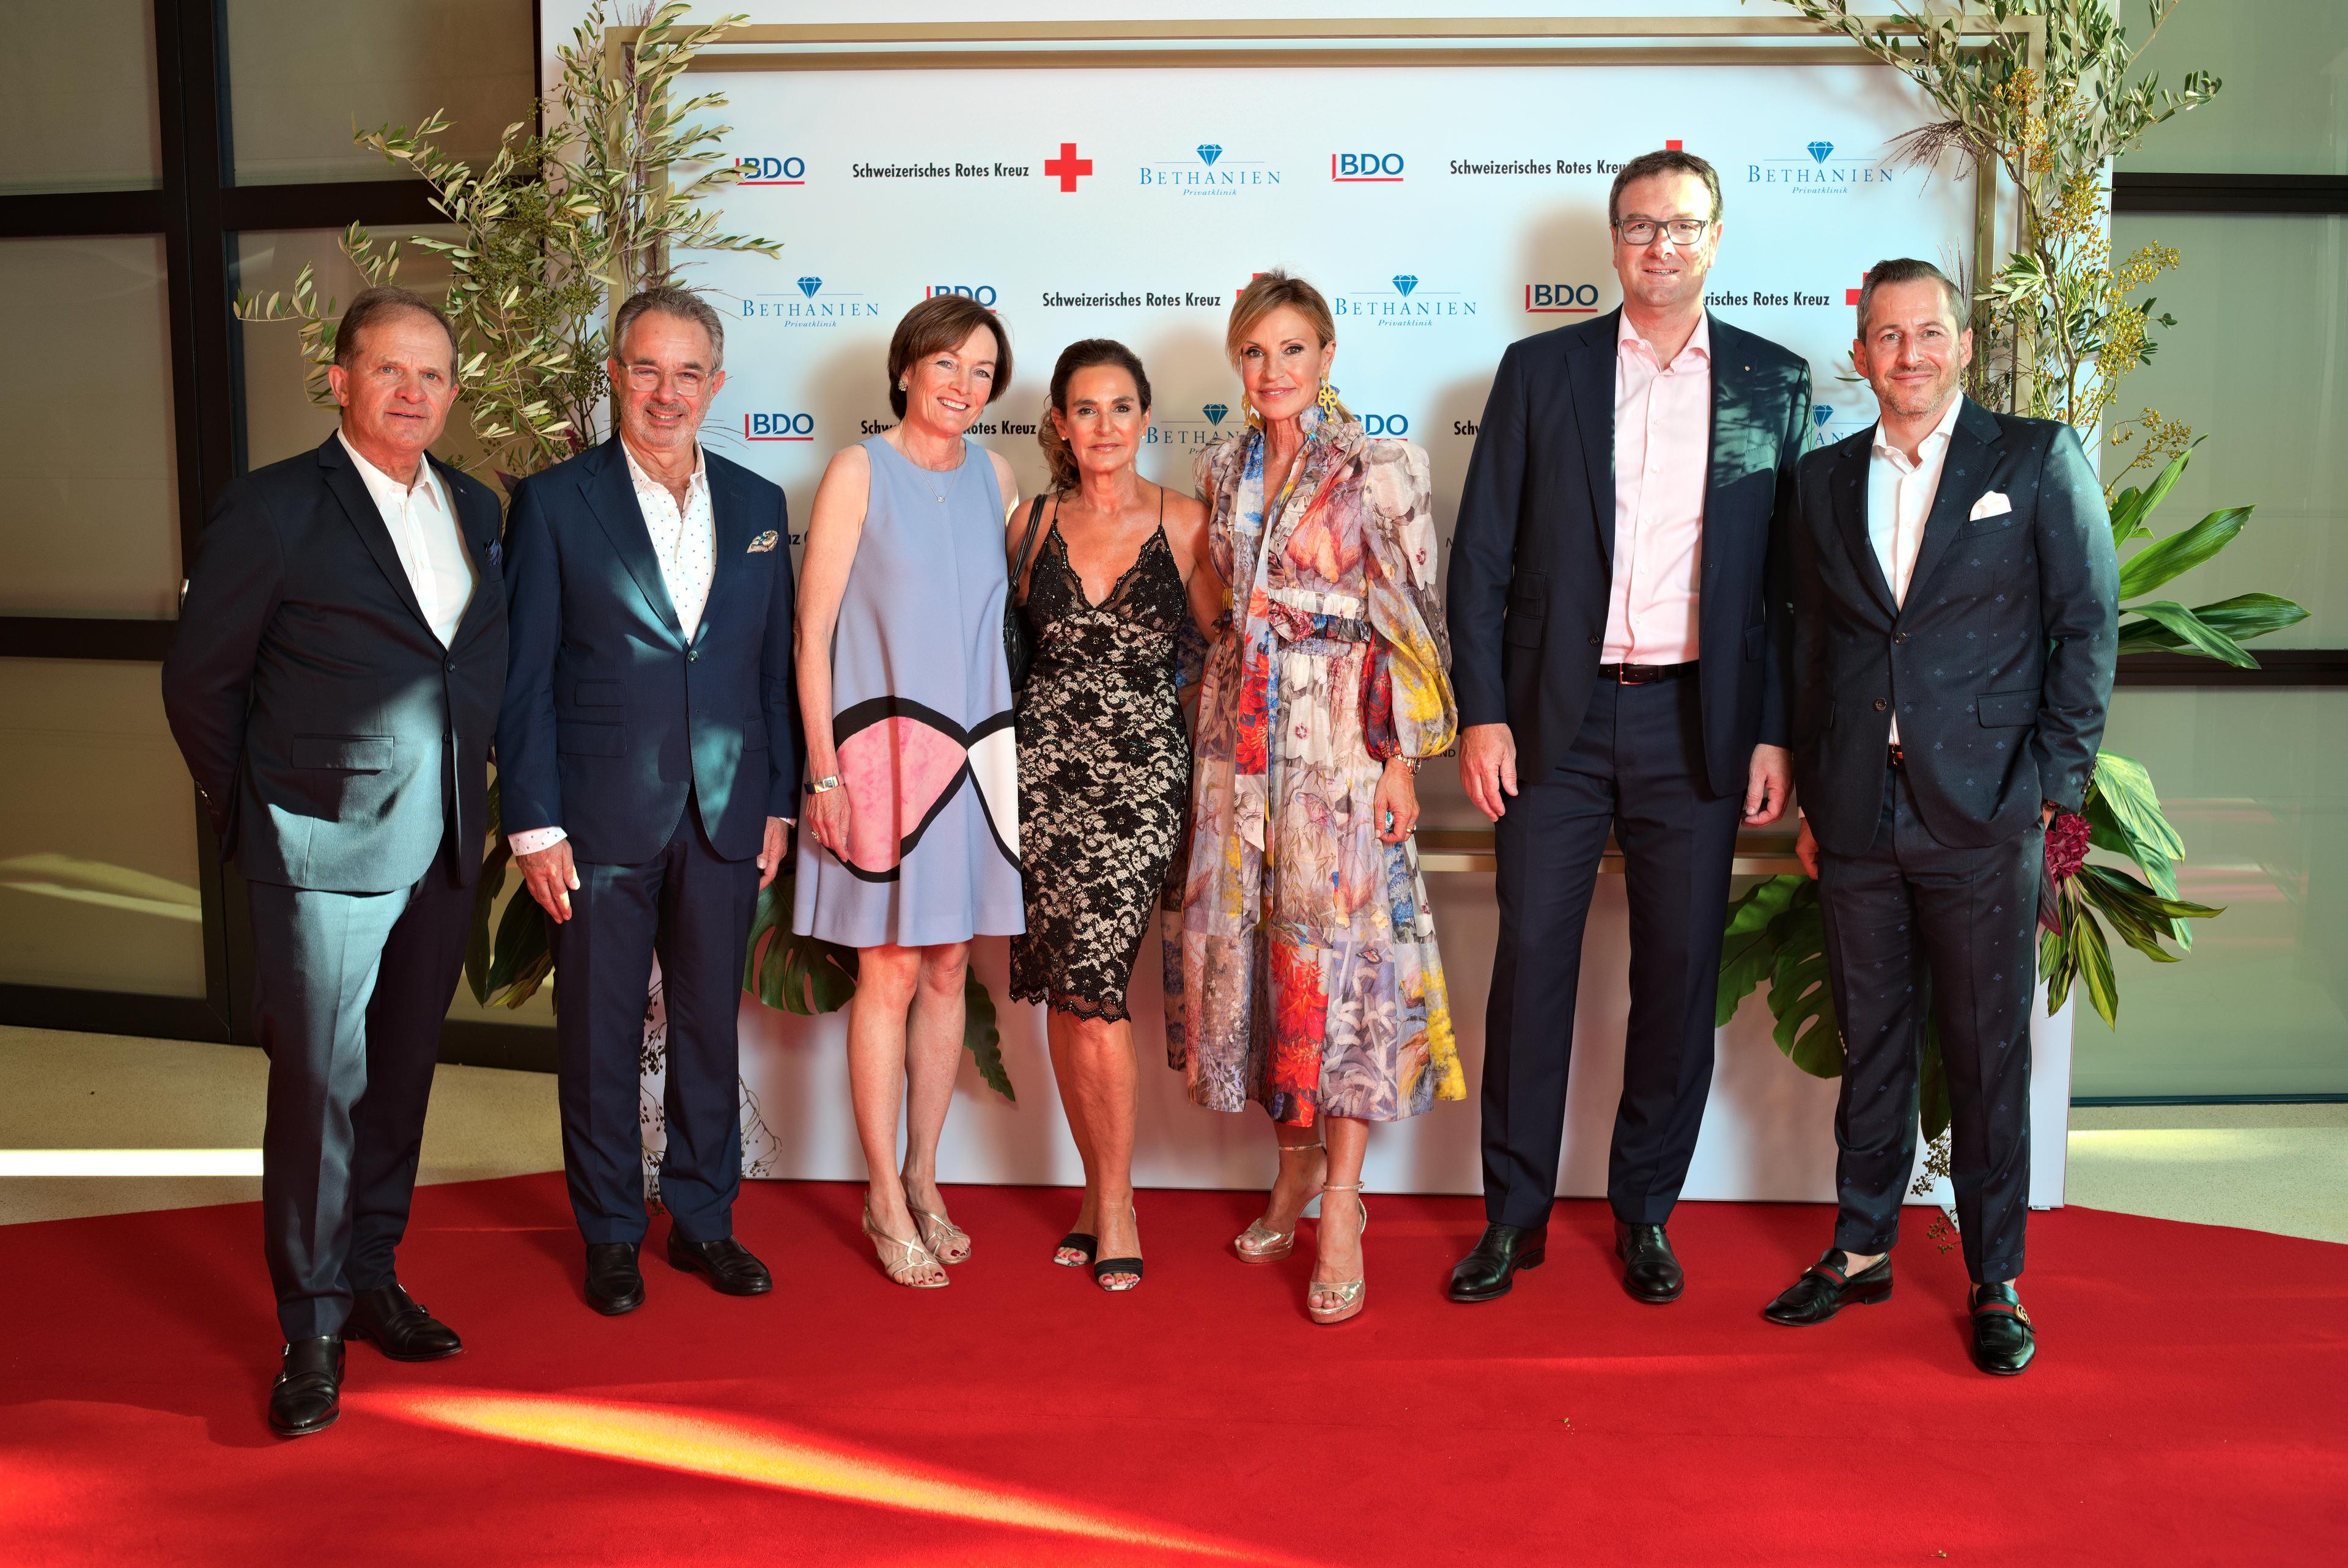 Example of a sponsorship partnership: the committee of the Red Cross Gala Zurich in front of the sponsor wall.